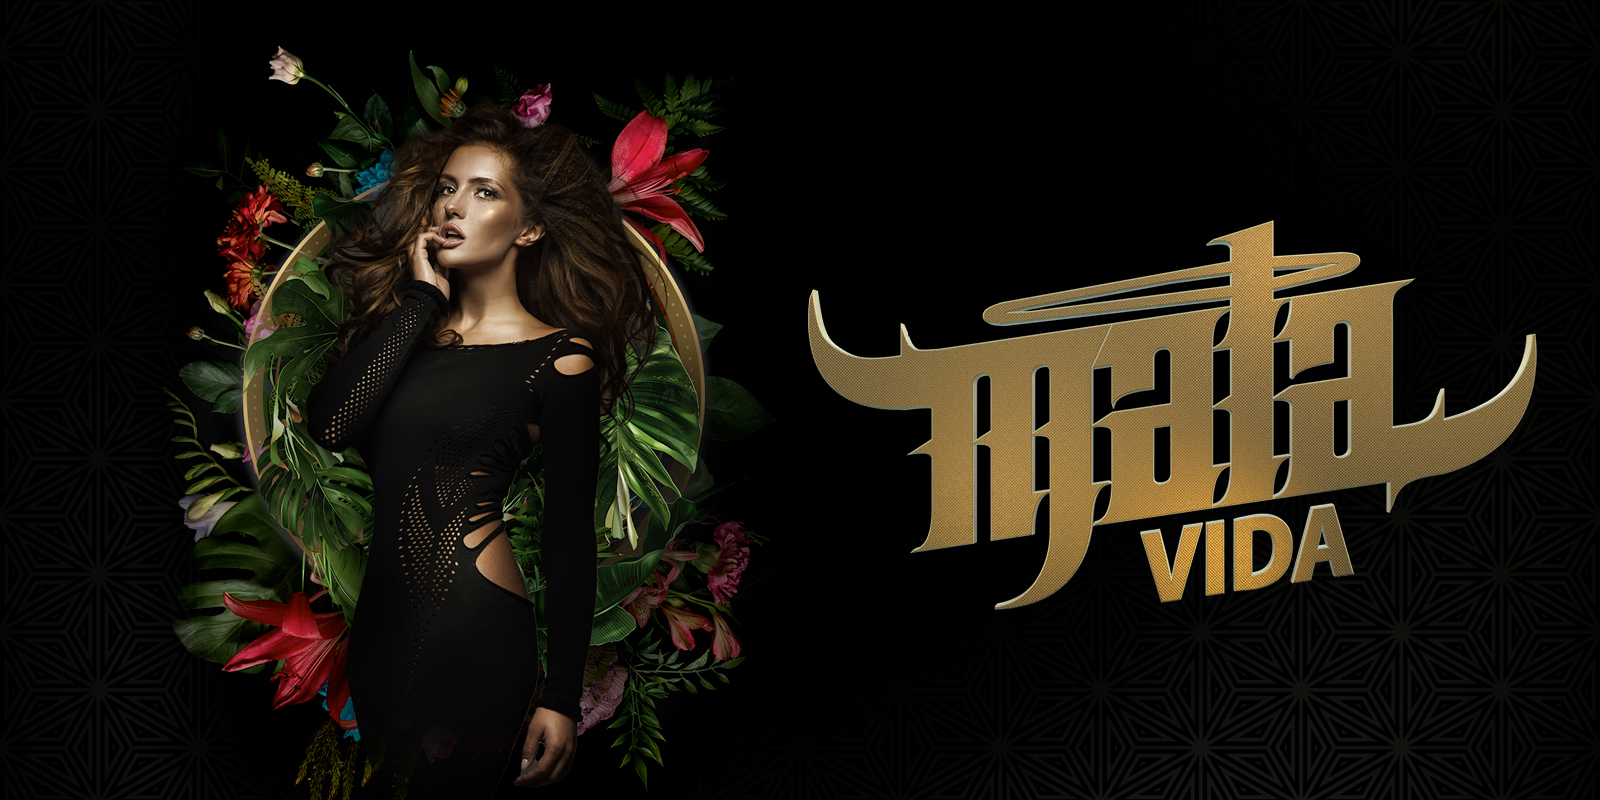 Mala Vida Visual showing a Latin woman and guest dj information with a vibrant green background